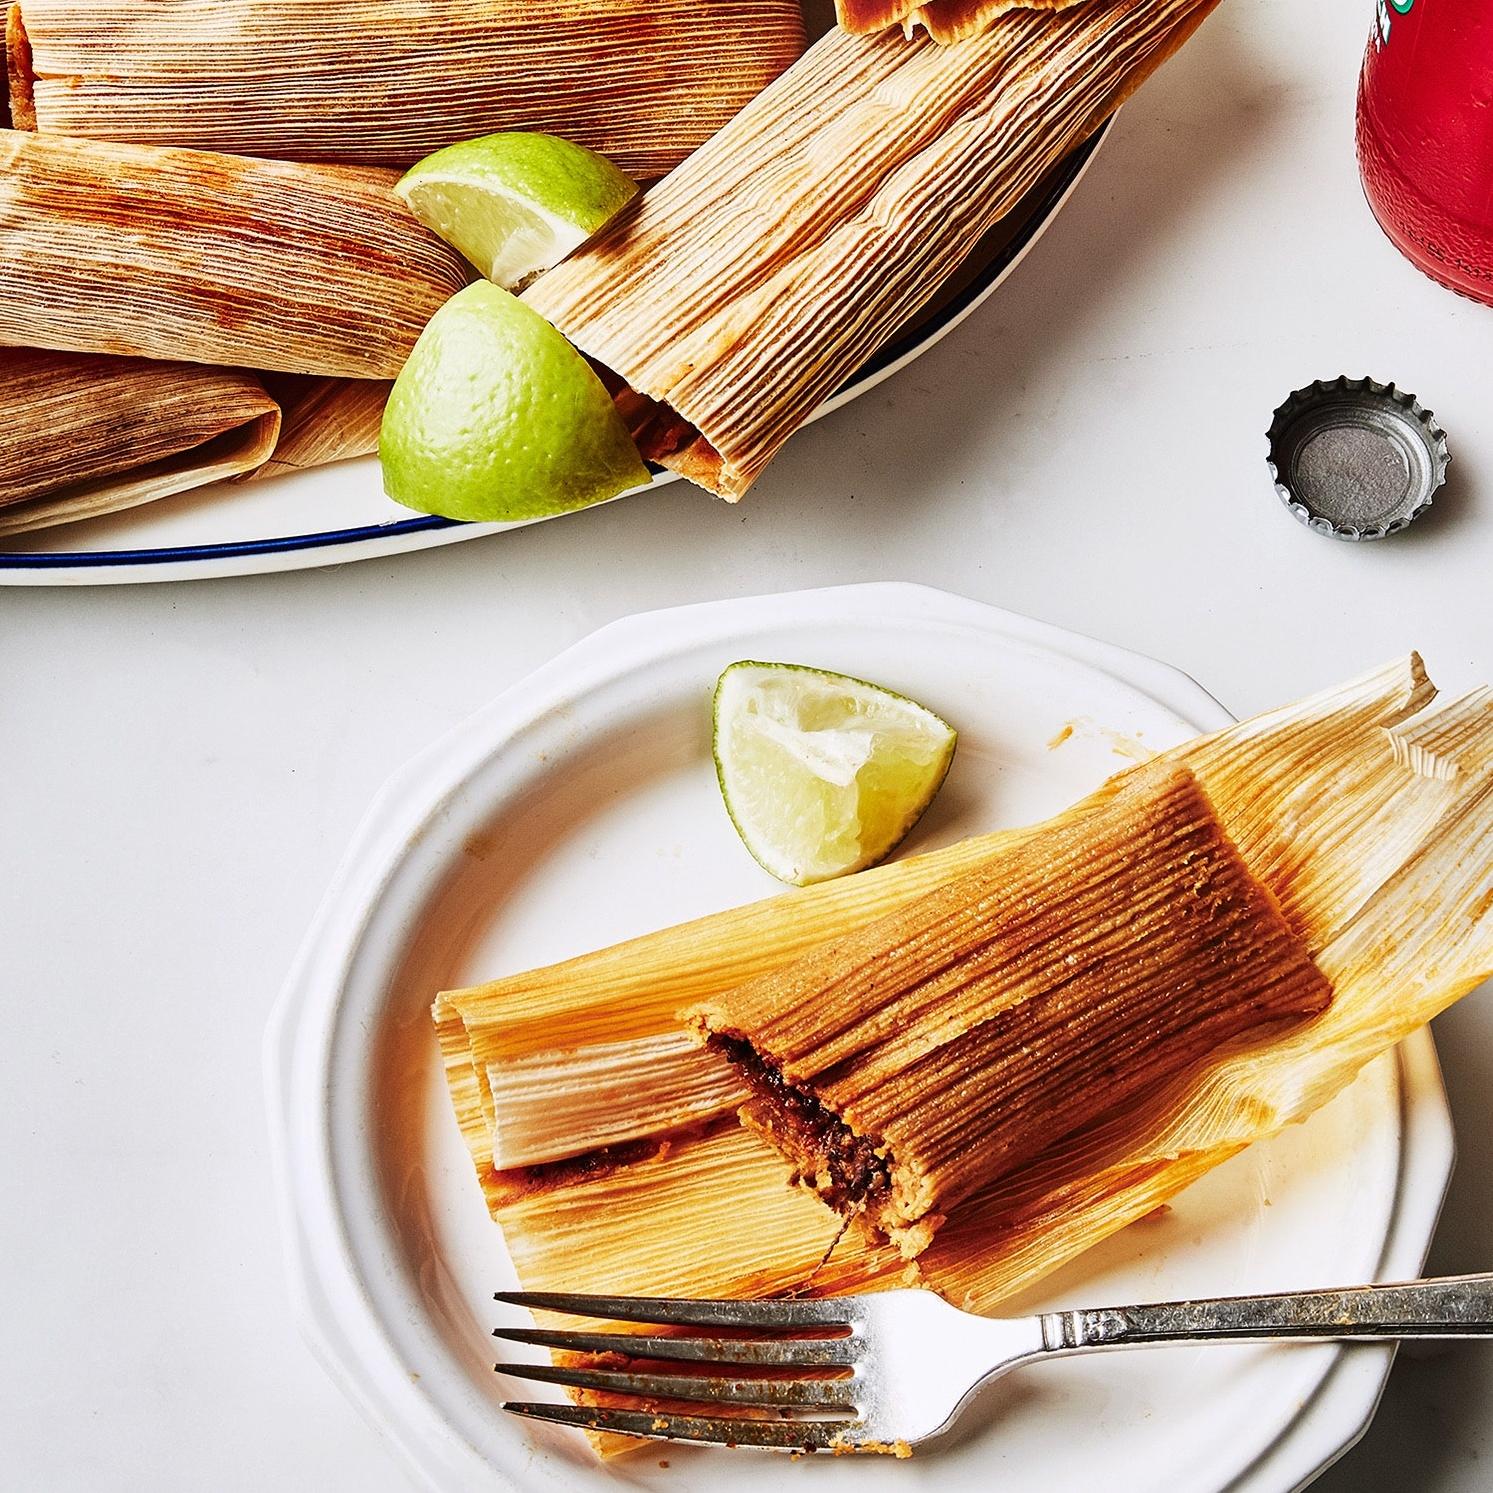  These tamales smell divine and will have your mouth watering before they even hit the table.